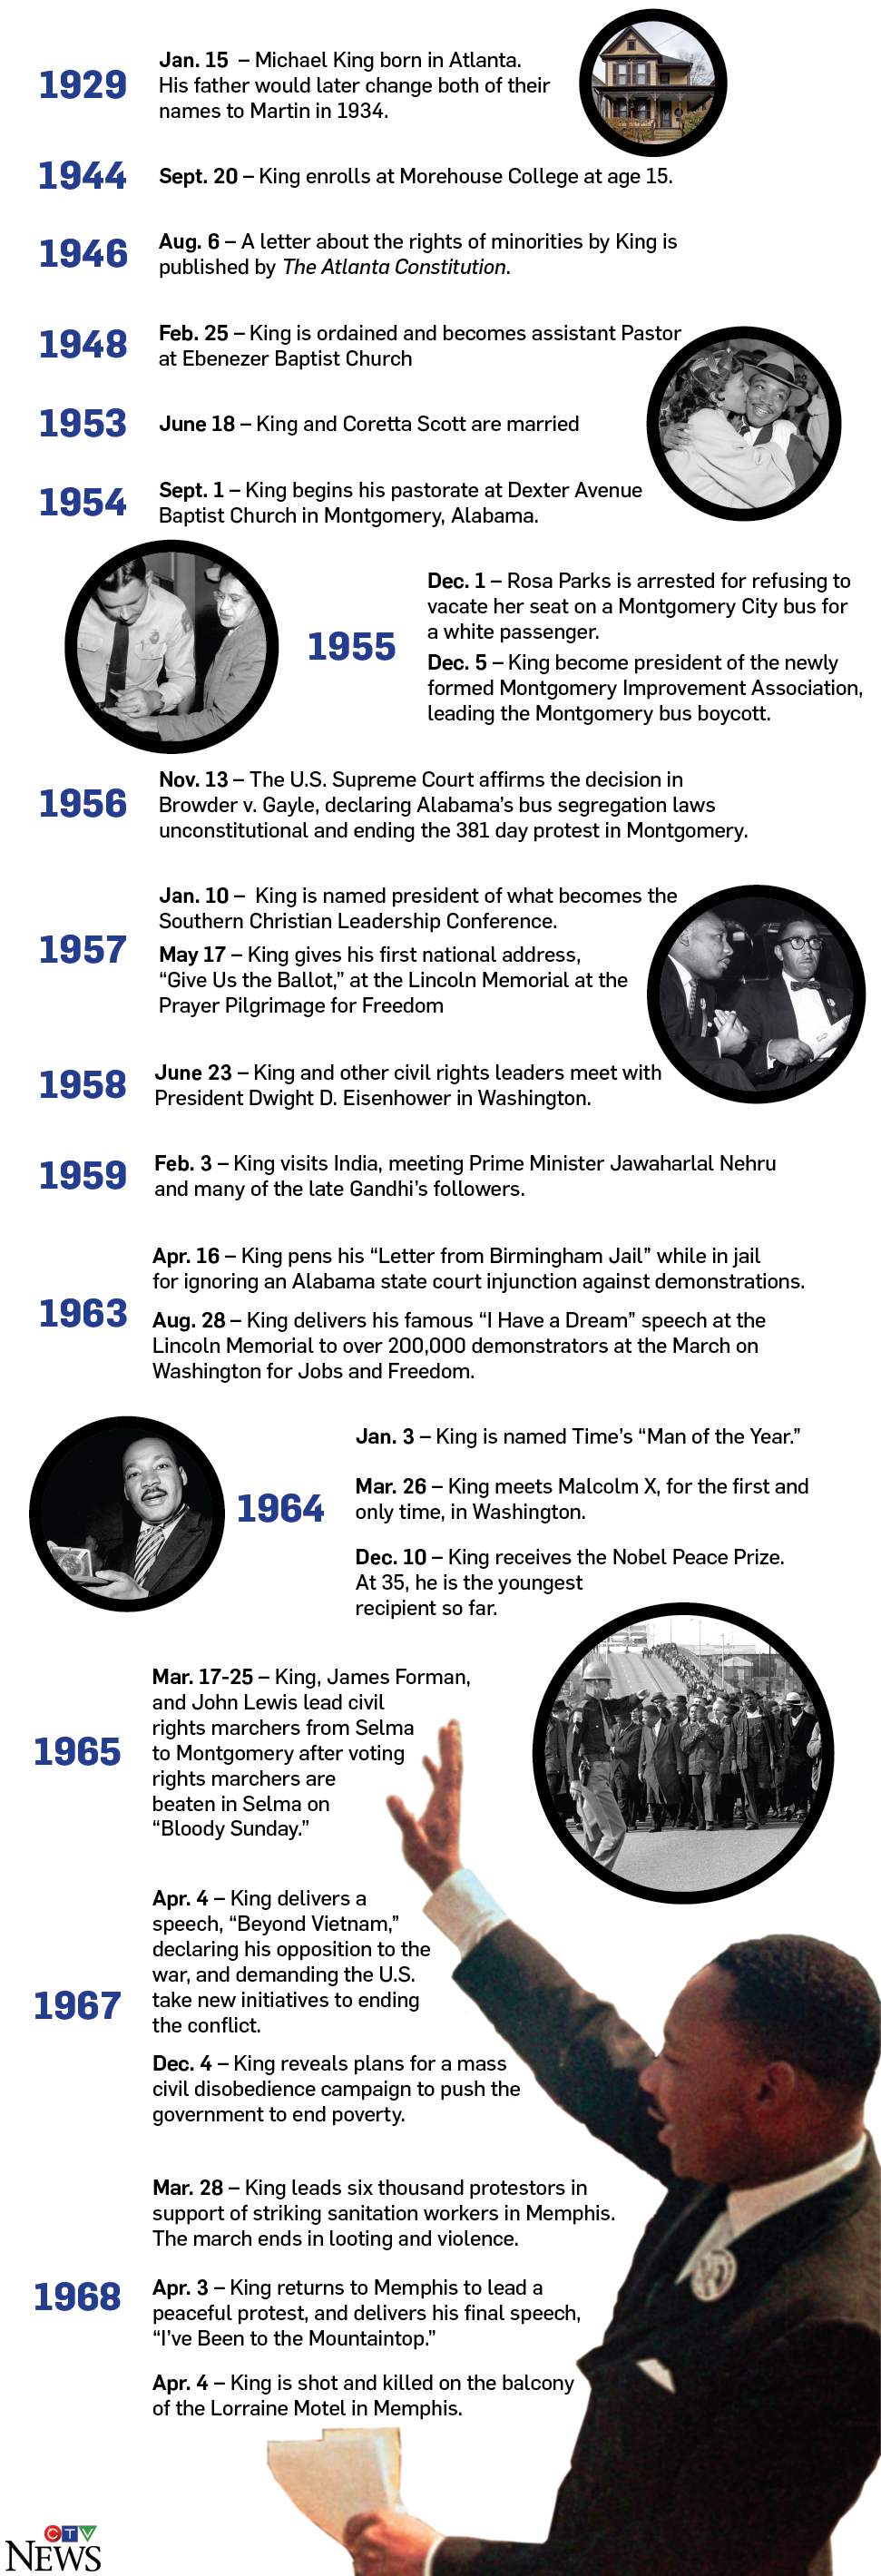 martin luther king biography timeline